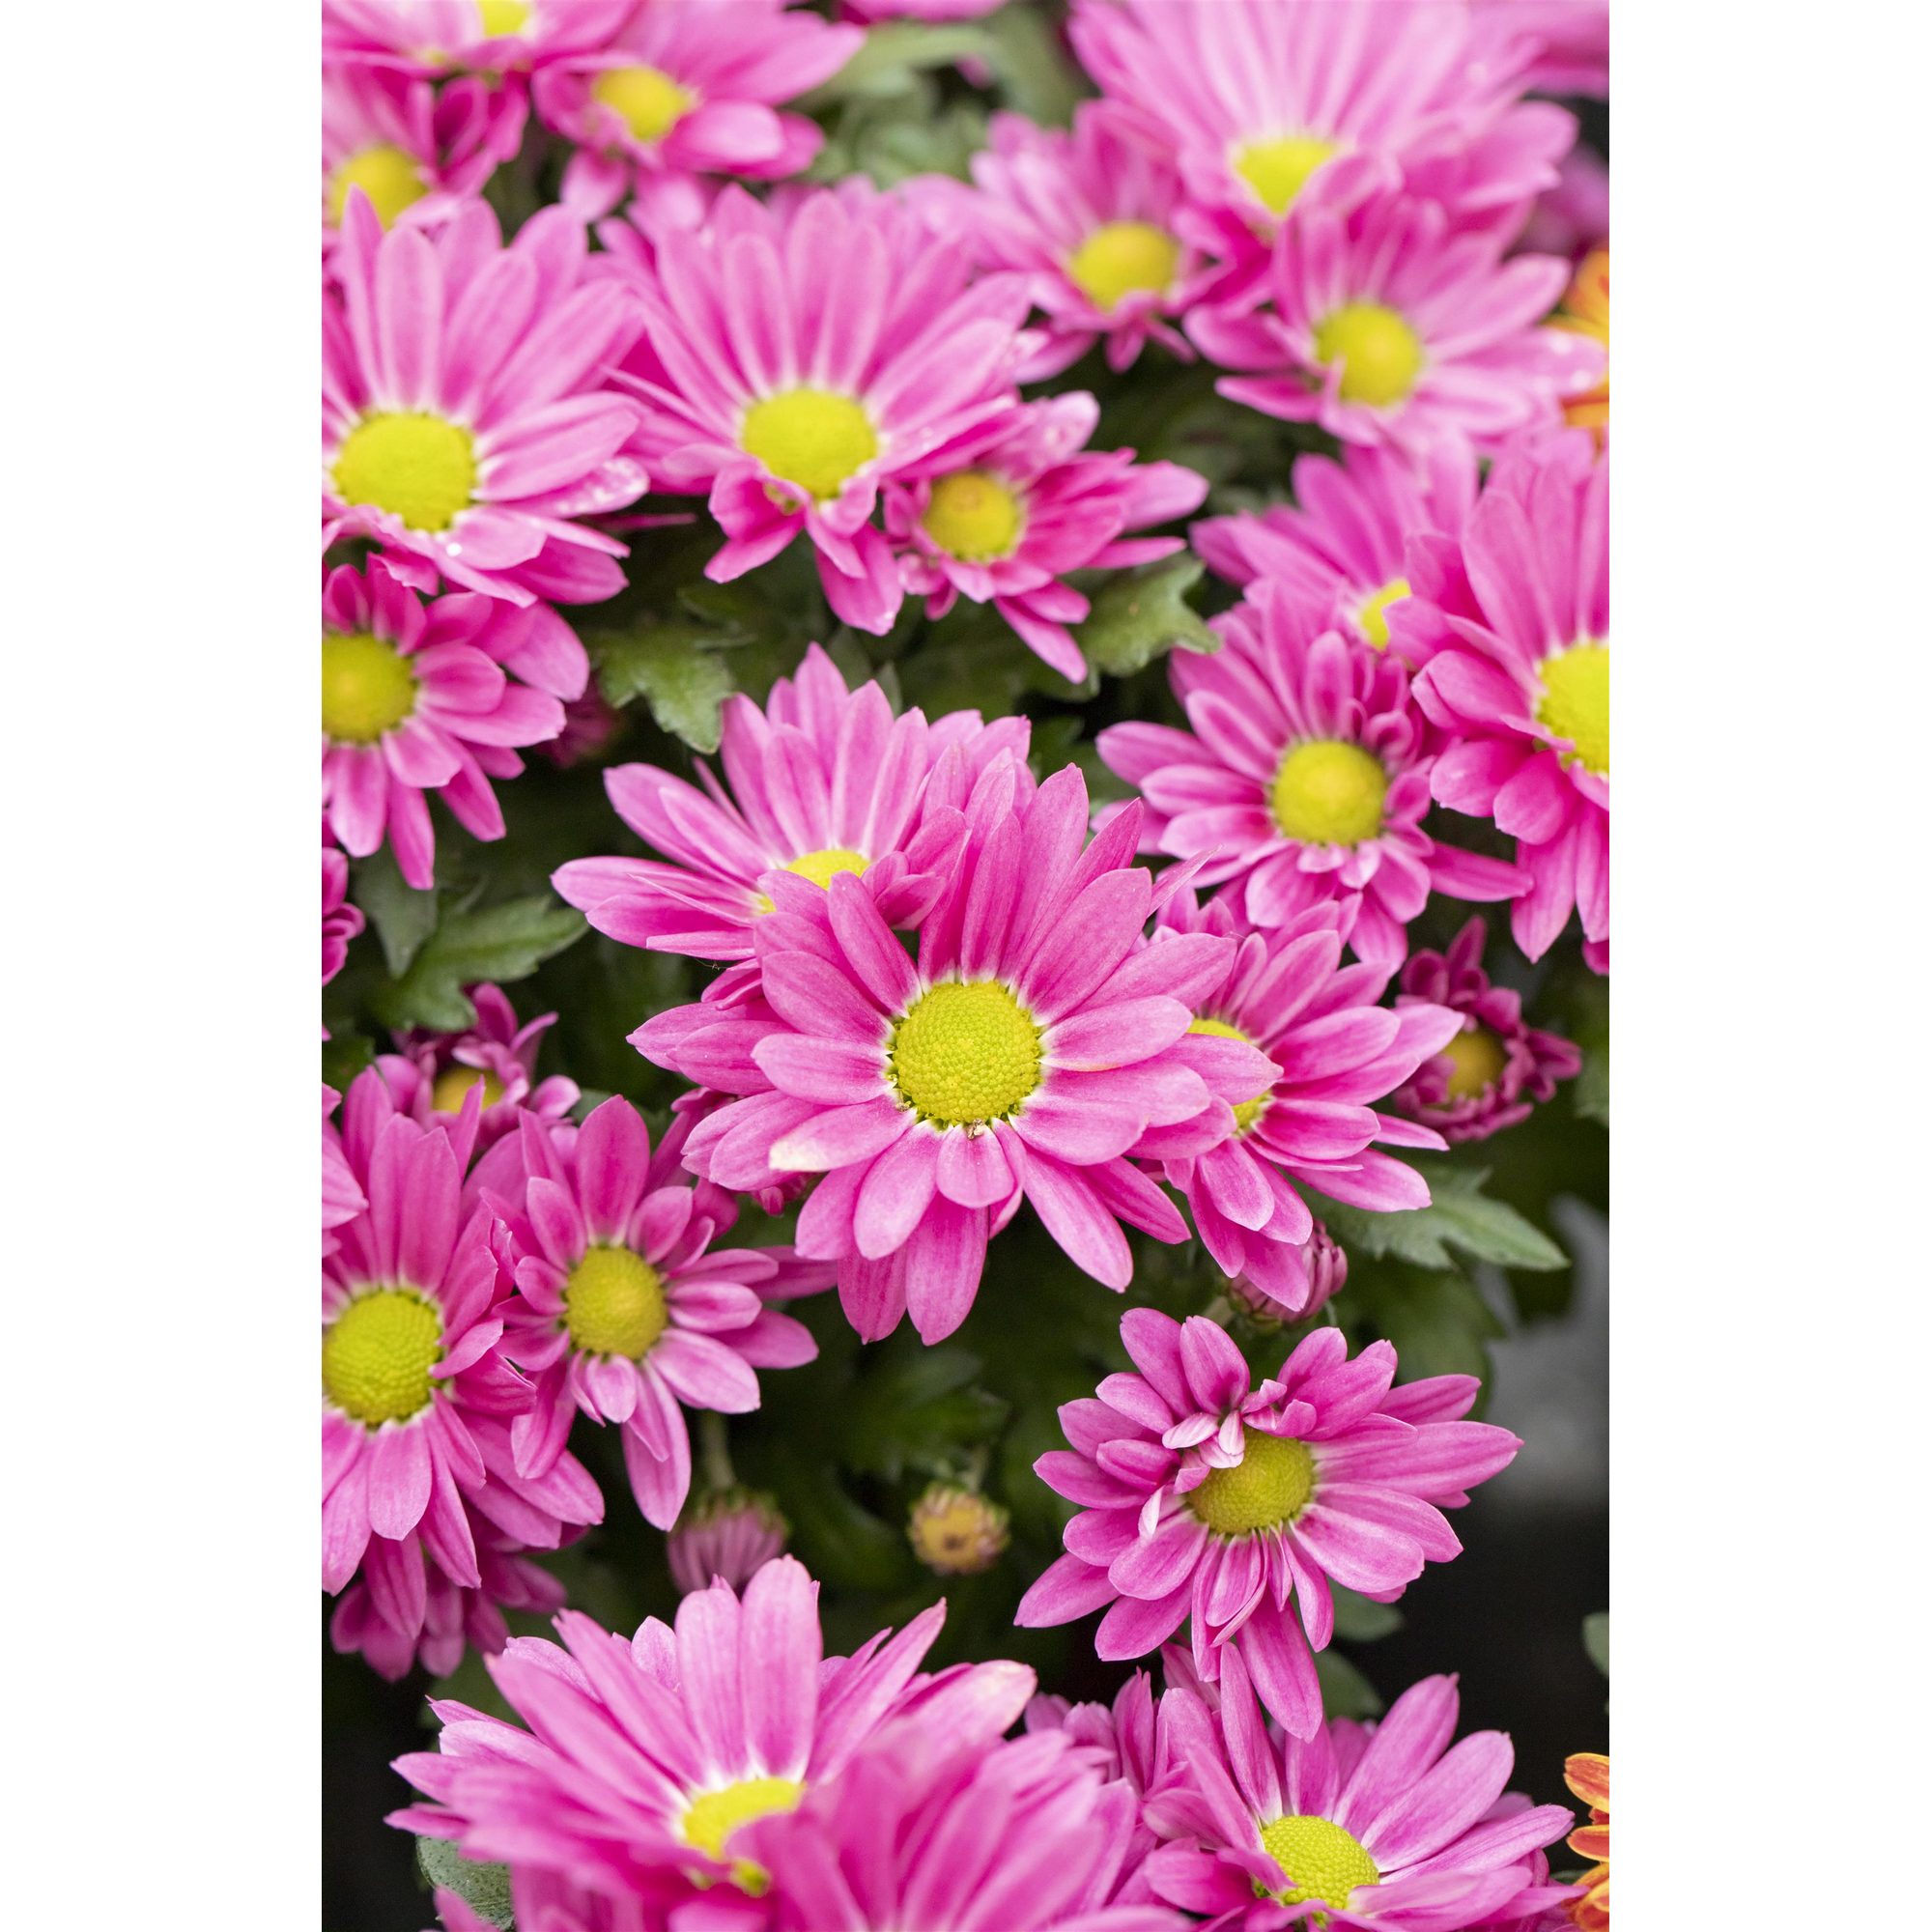 Bauernchrysantheme pink 12 cm Topf, 2er-Set + product picture